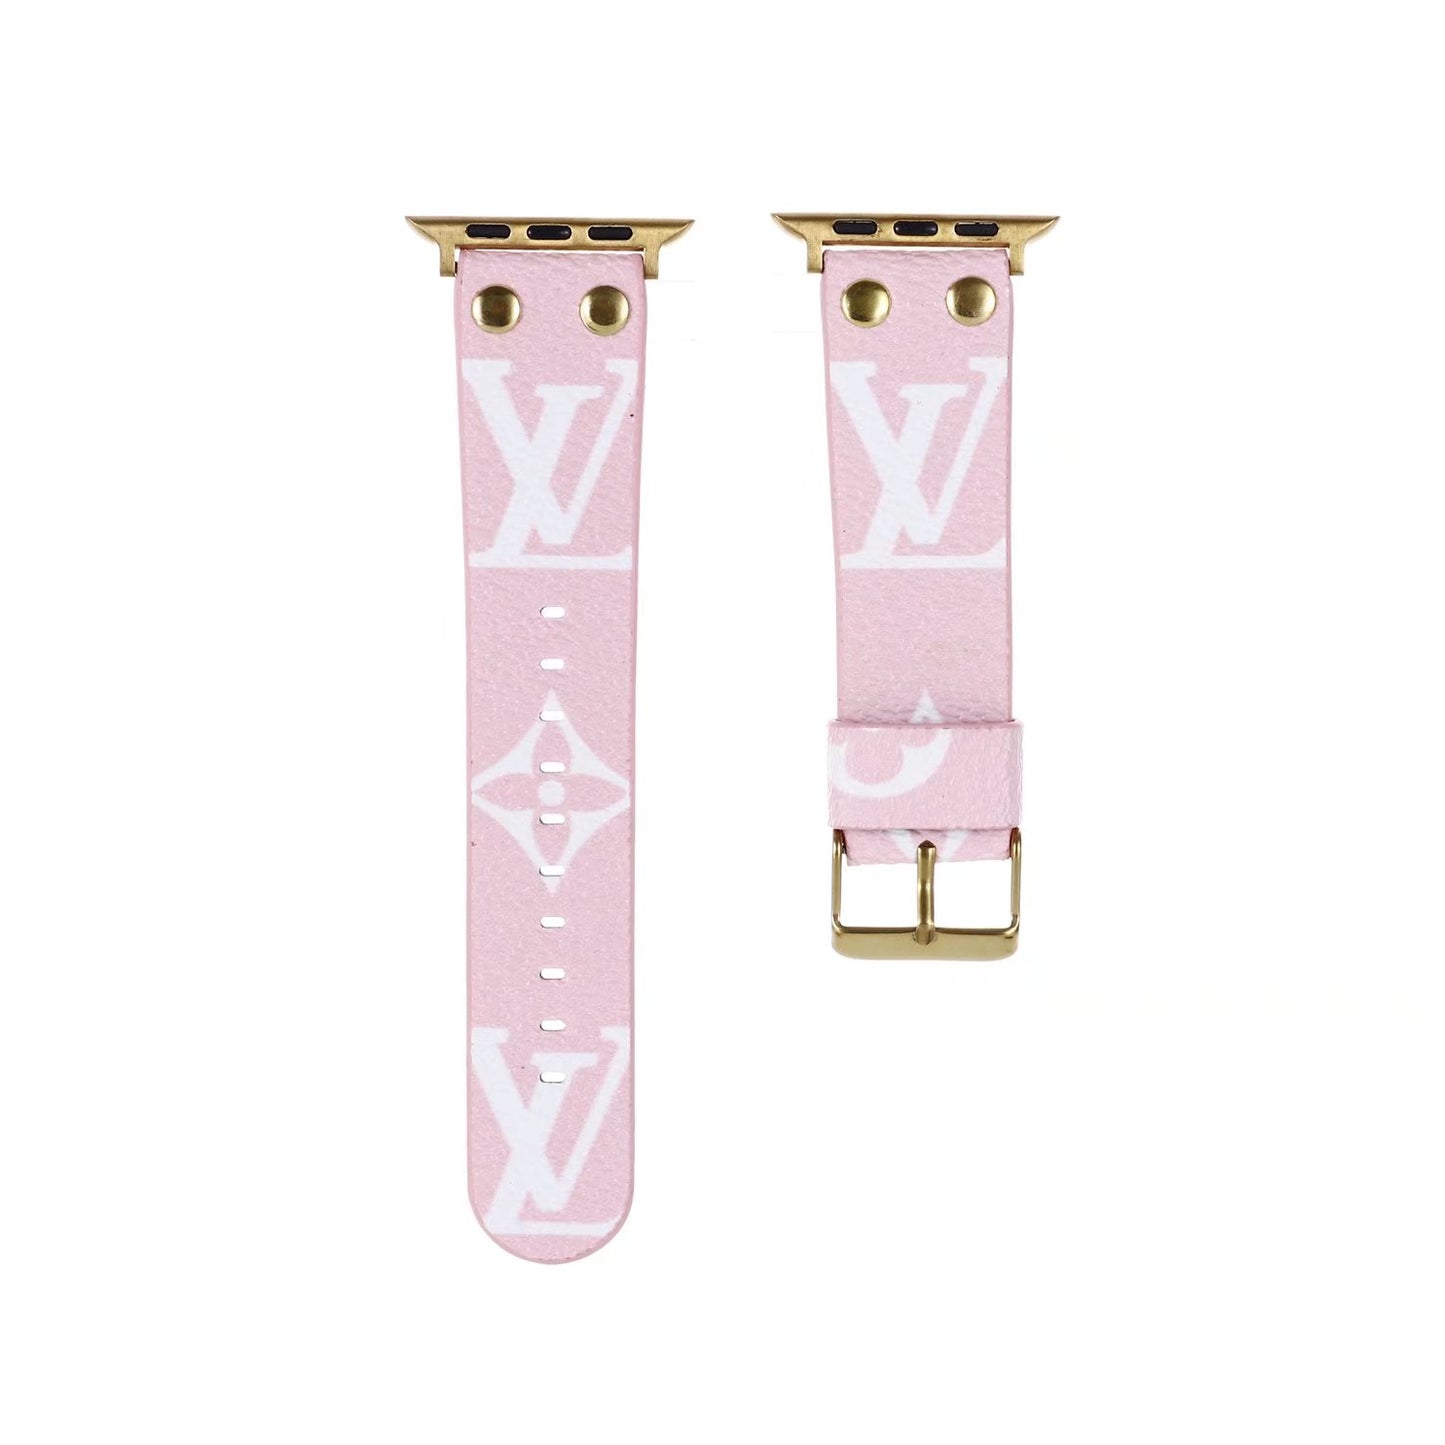 Luxury Louis Watch Bands v2 in pink